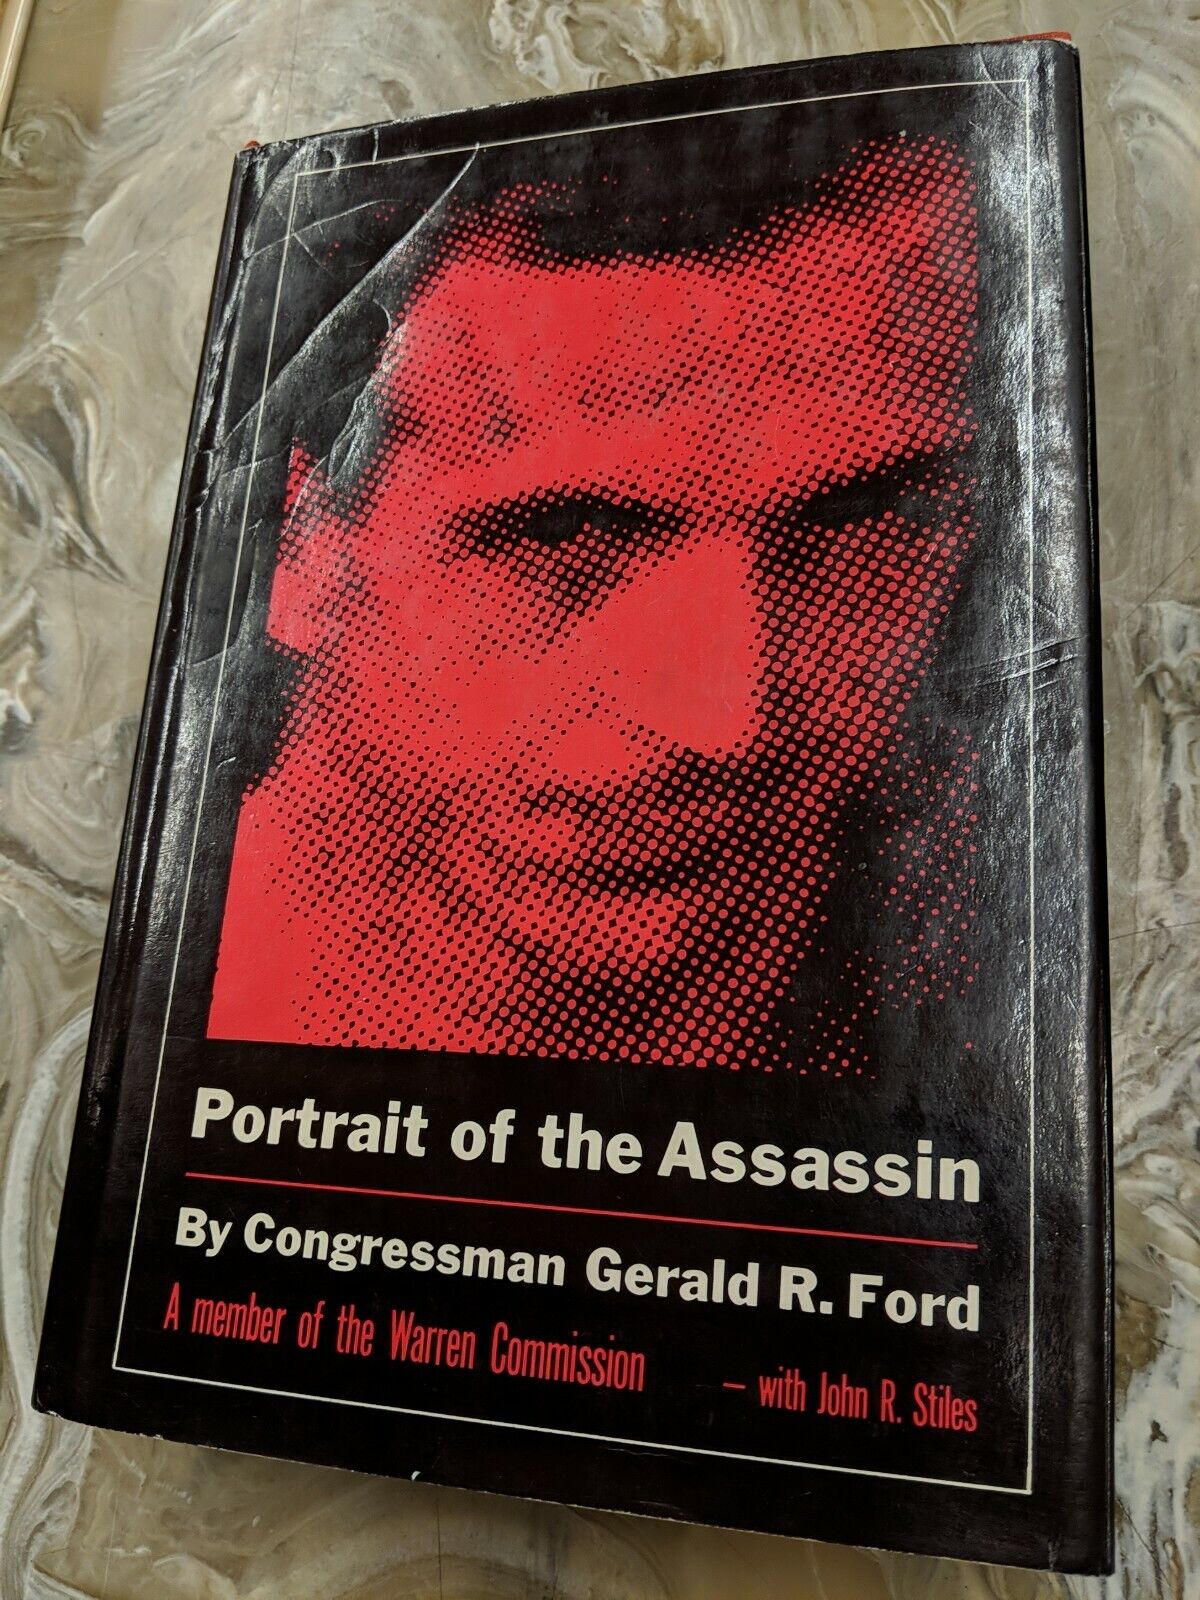 Portrait Of The Assassin by Congressman Gerald R  Ford